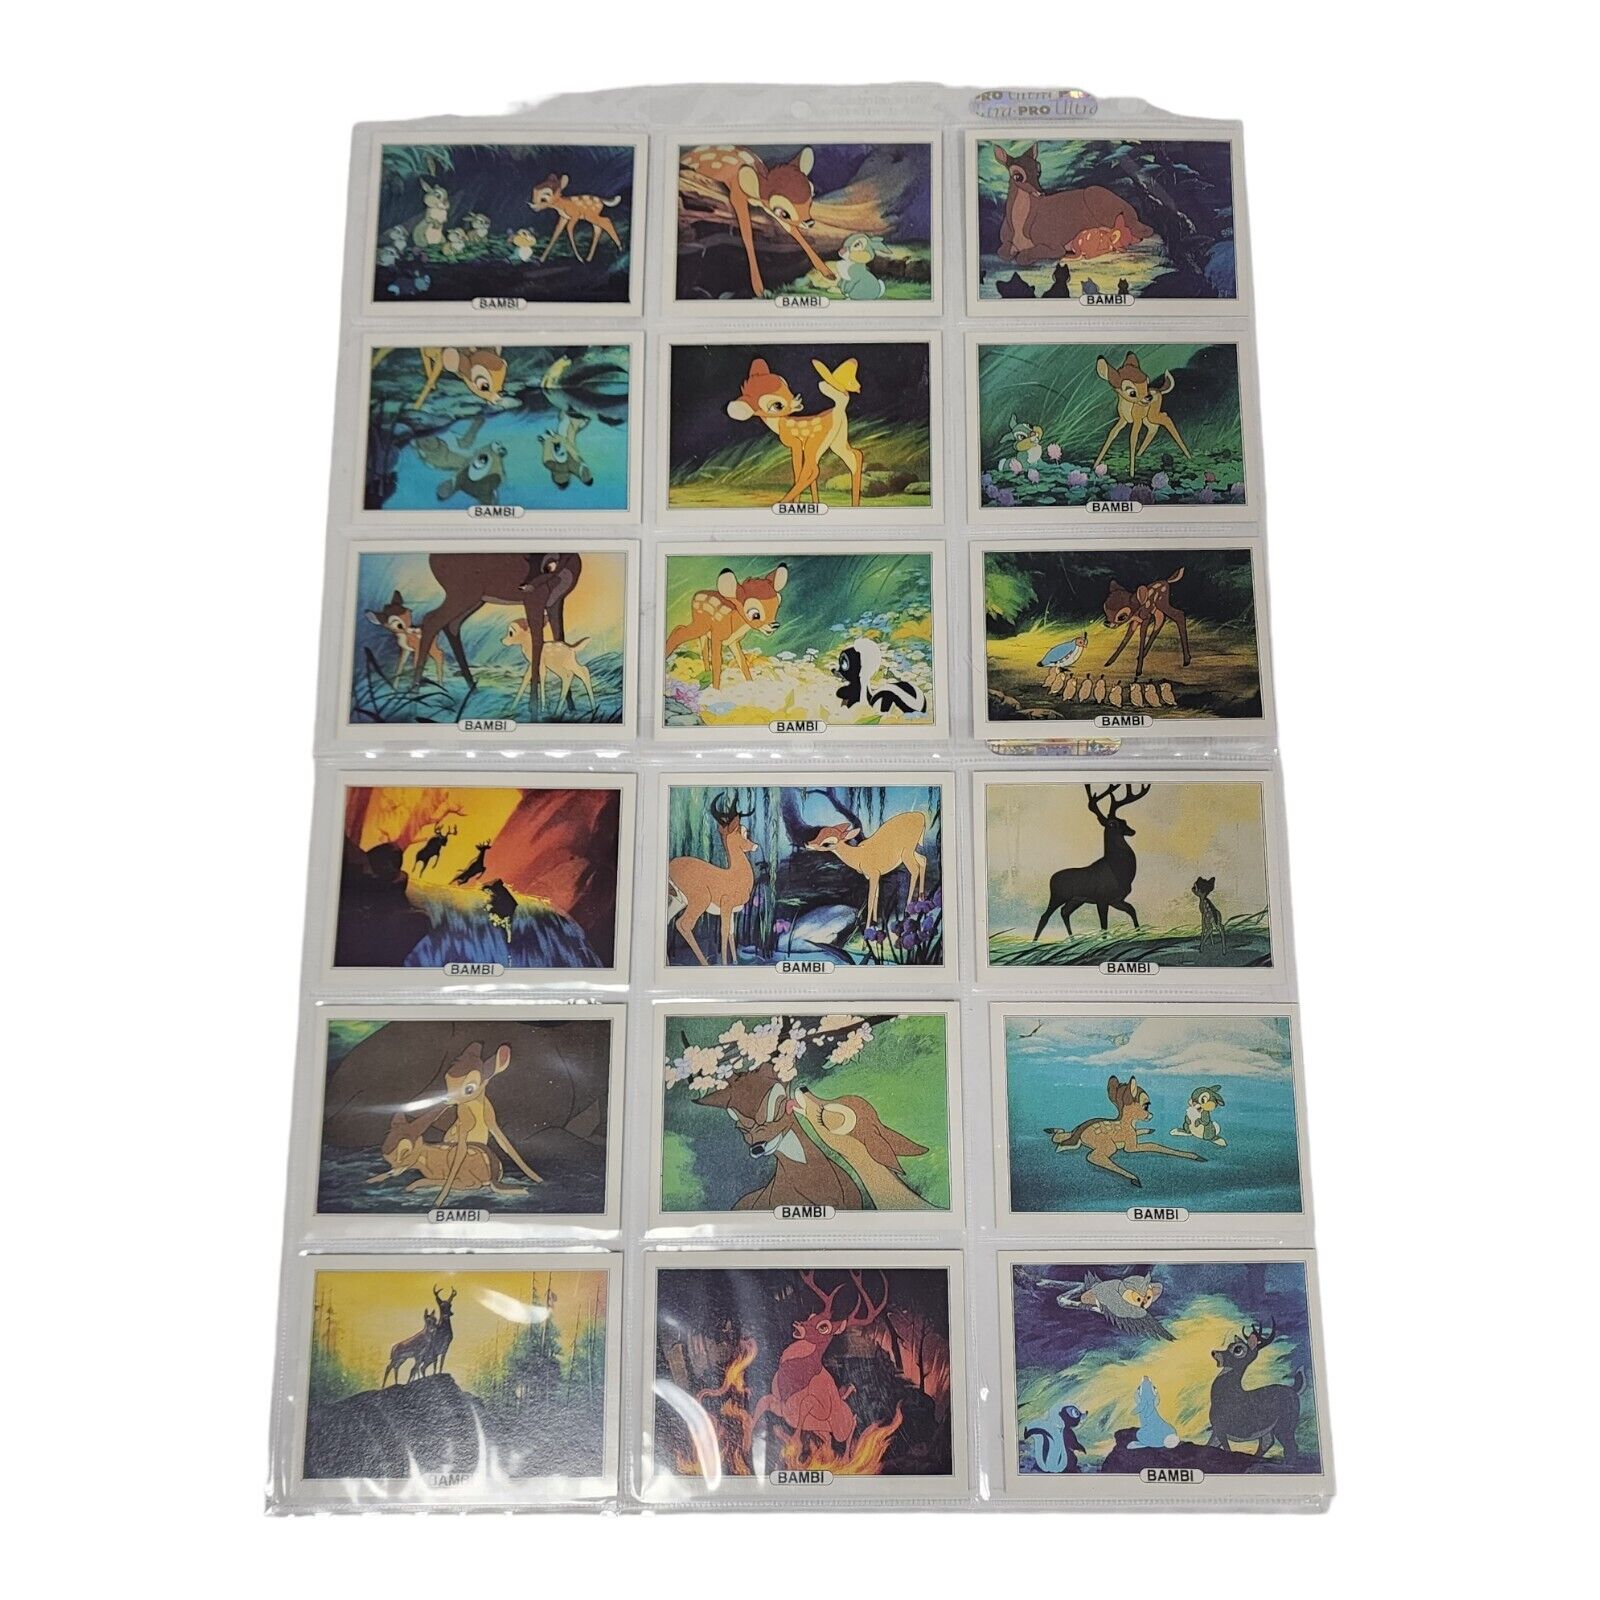 Vintage Disney Bambi Movie Scene Trading Cards Series A Complete Full Set 1-18